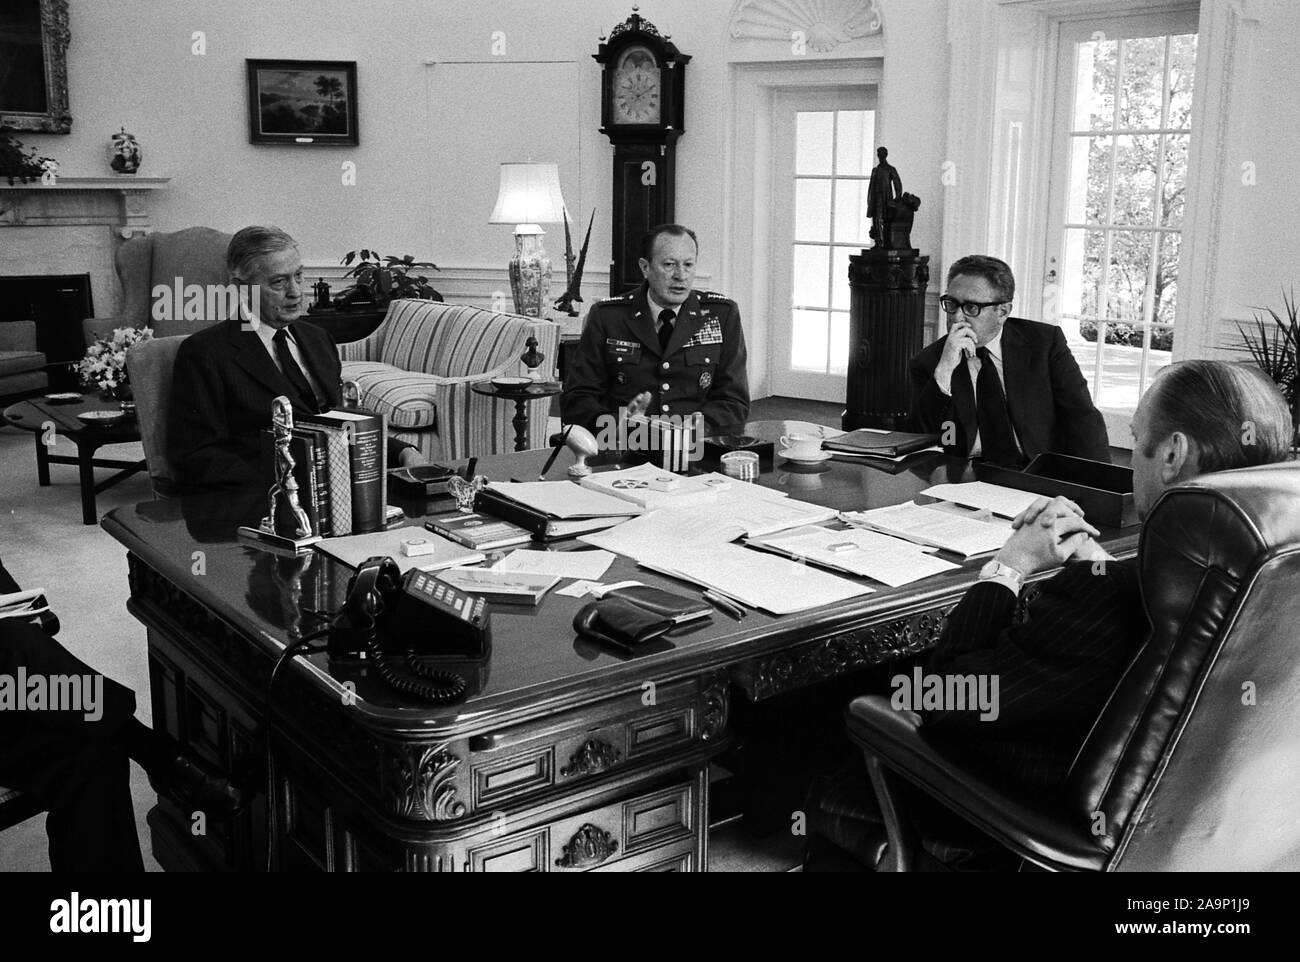 This photograph was taken in the Oval Office of the White House. Pictured with President Ford are Brent Scowcroft, Deputy Assistant to the President for National Security Affairs; Graham Martin, United States Ambassador to the Republic of Vietnam; Army Chief of Staff General Frederick Weyand; and Secretary of State Henry A. Kissinger.  Gerald Ford has his back to the camera. Brent Scowcroft is partially obscured. Stock Photo